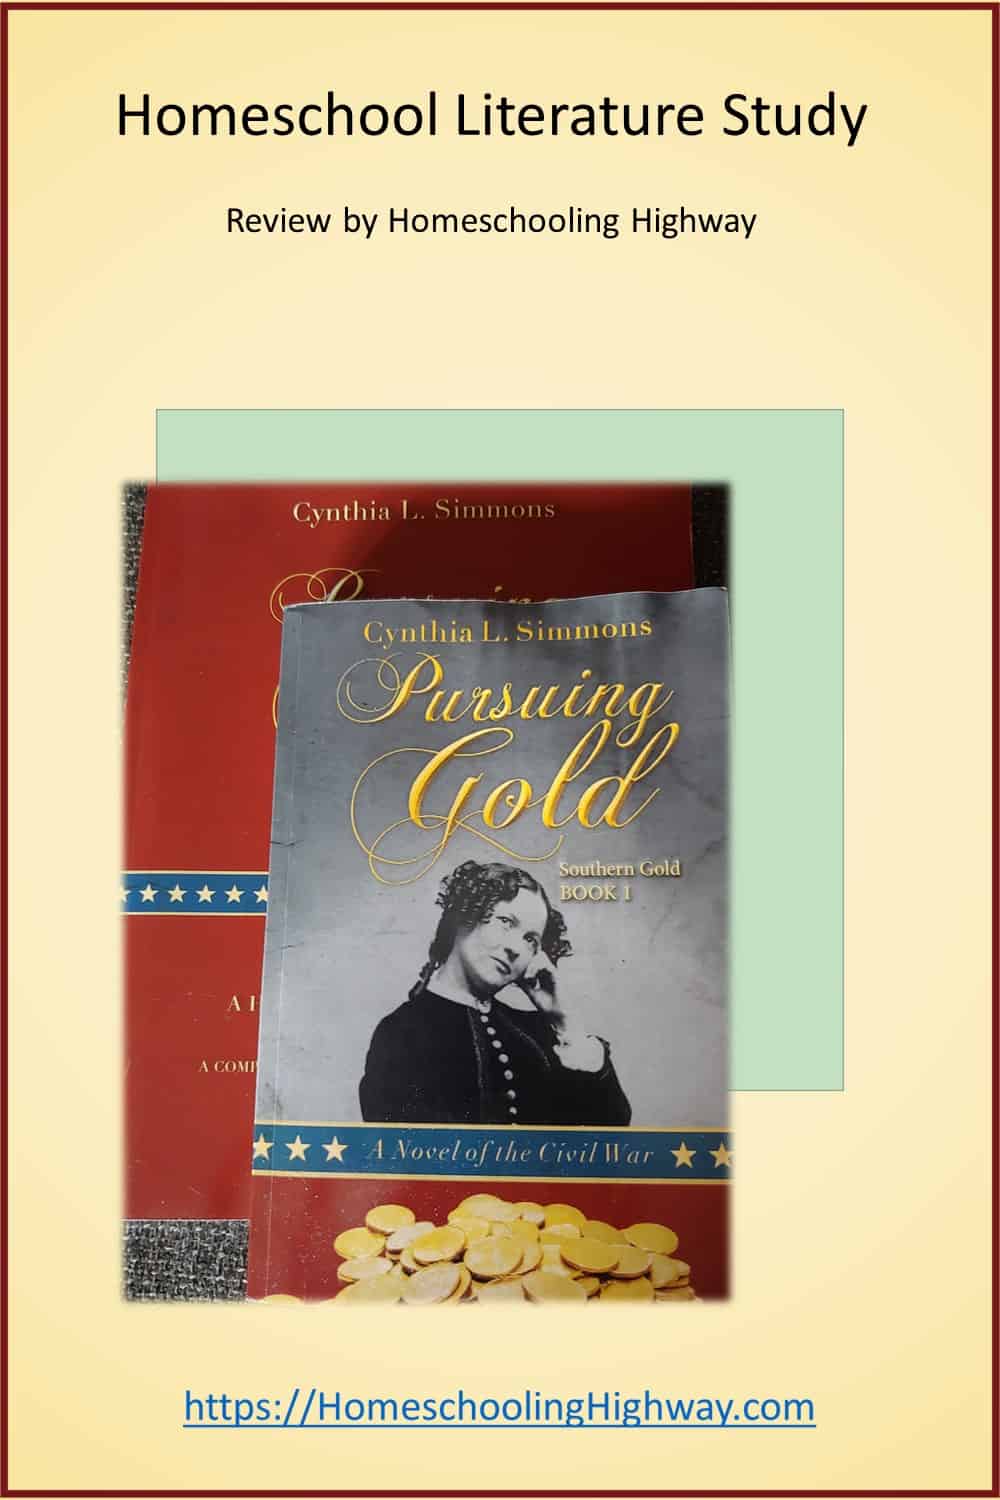 Literature Study Guide Review by HomeschoolingHighway.com. Pursuing Gold by Cynthia Simmons